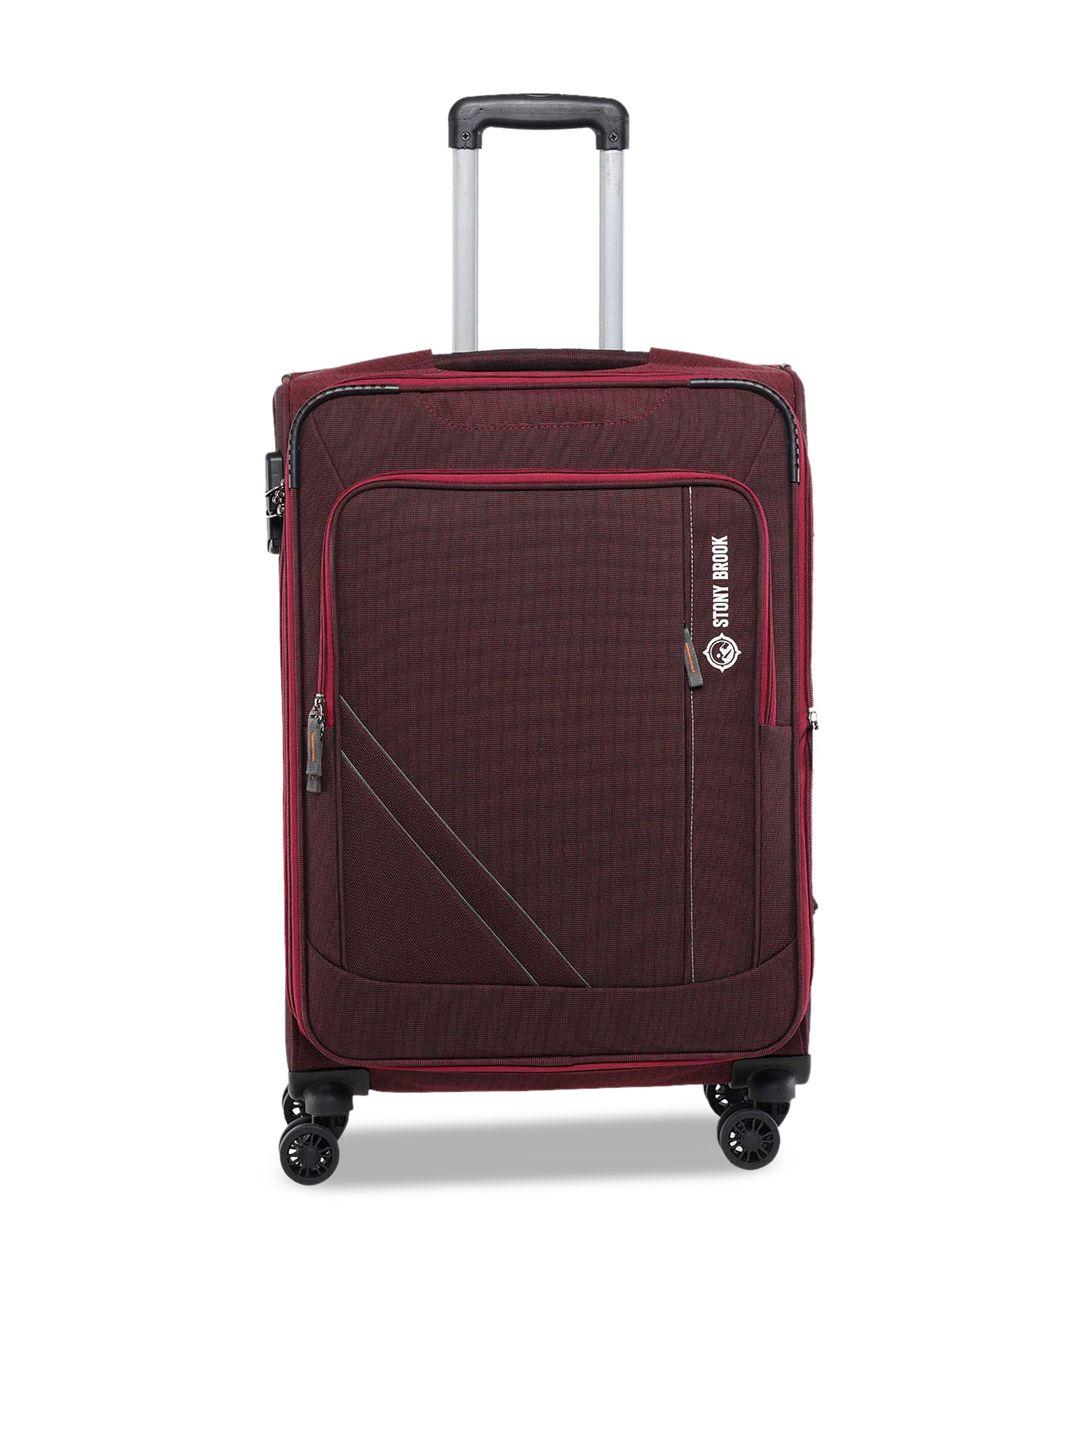 stony brook by nasher miles textured soft-sided suitcase trolley bag